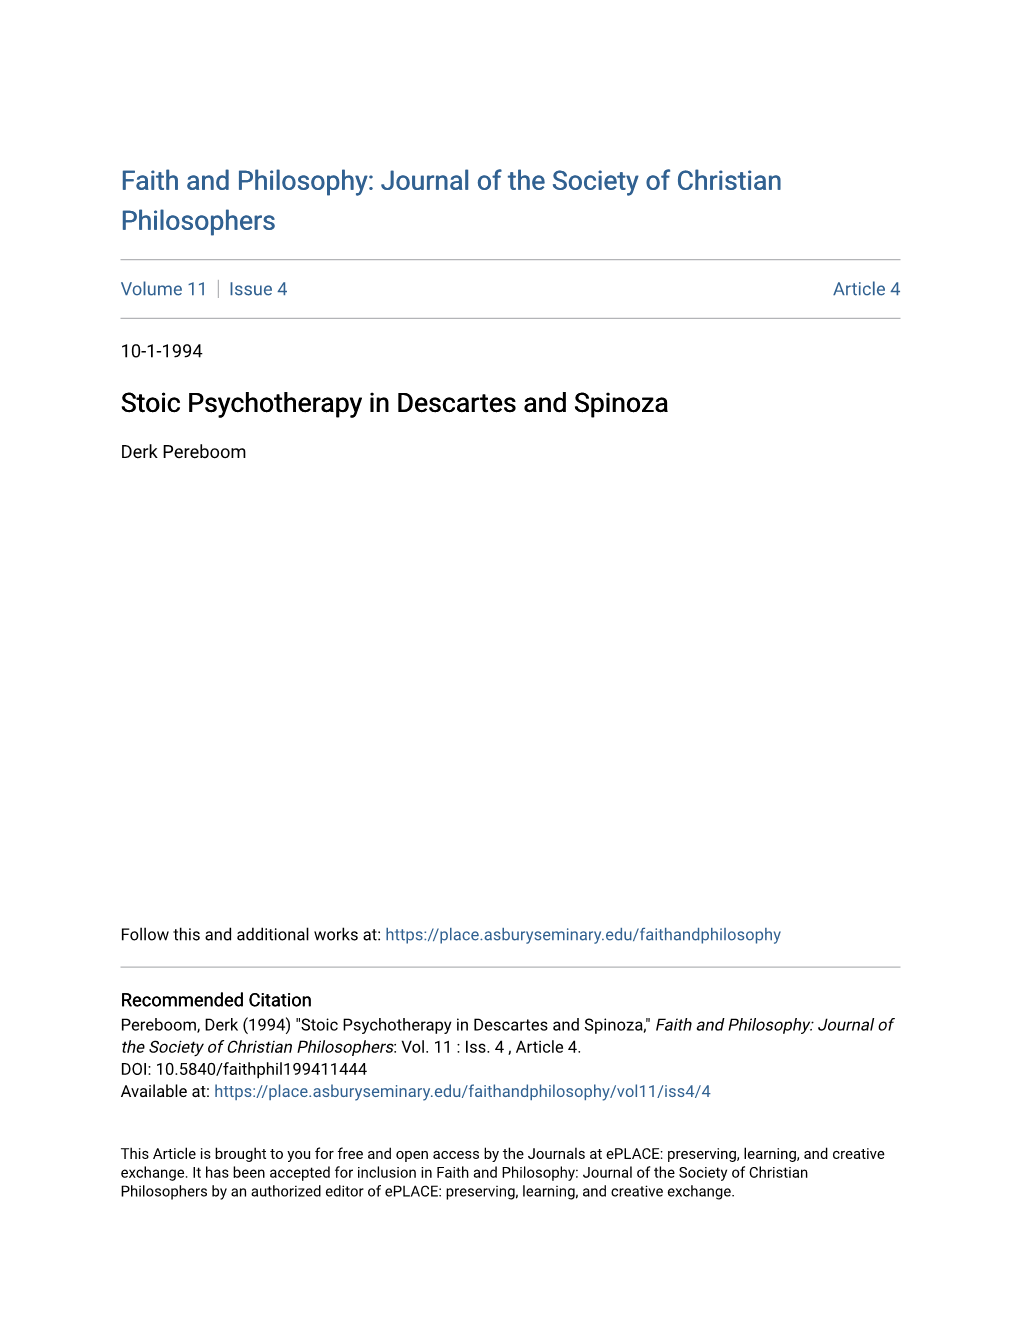 Stoic Psychotherapy in Descartes and Spinoza